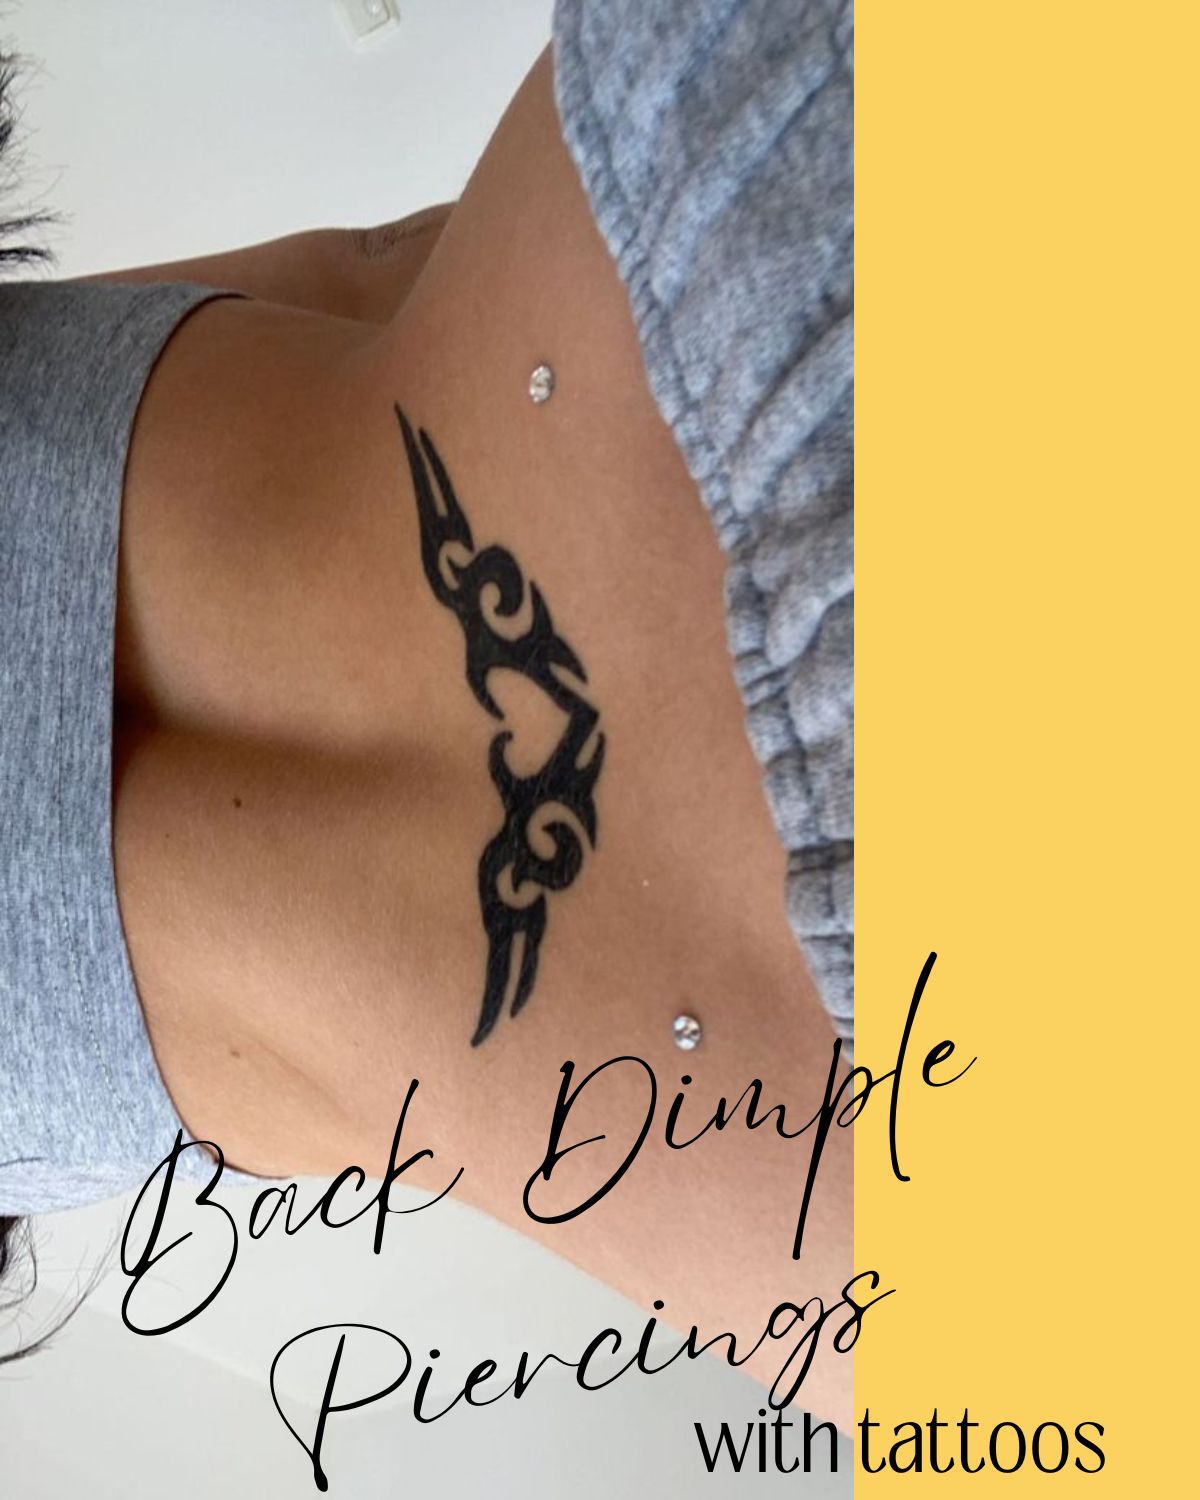 A girl with a tattoo and back dimple piercing